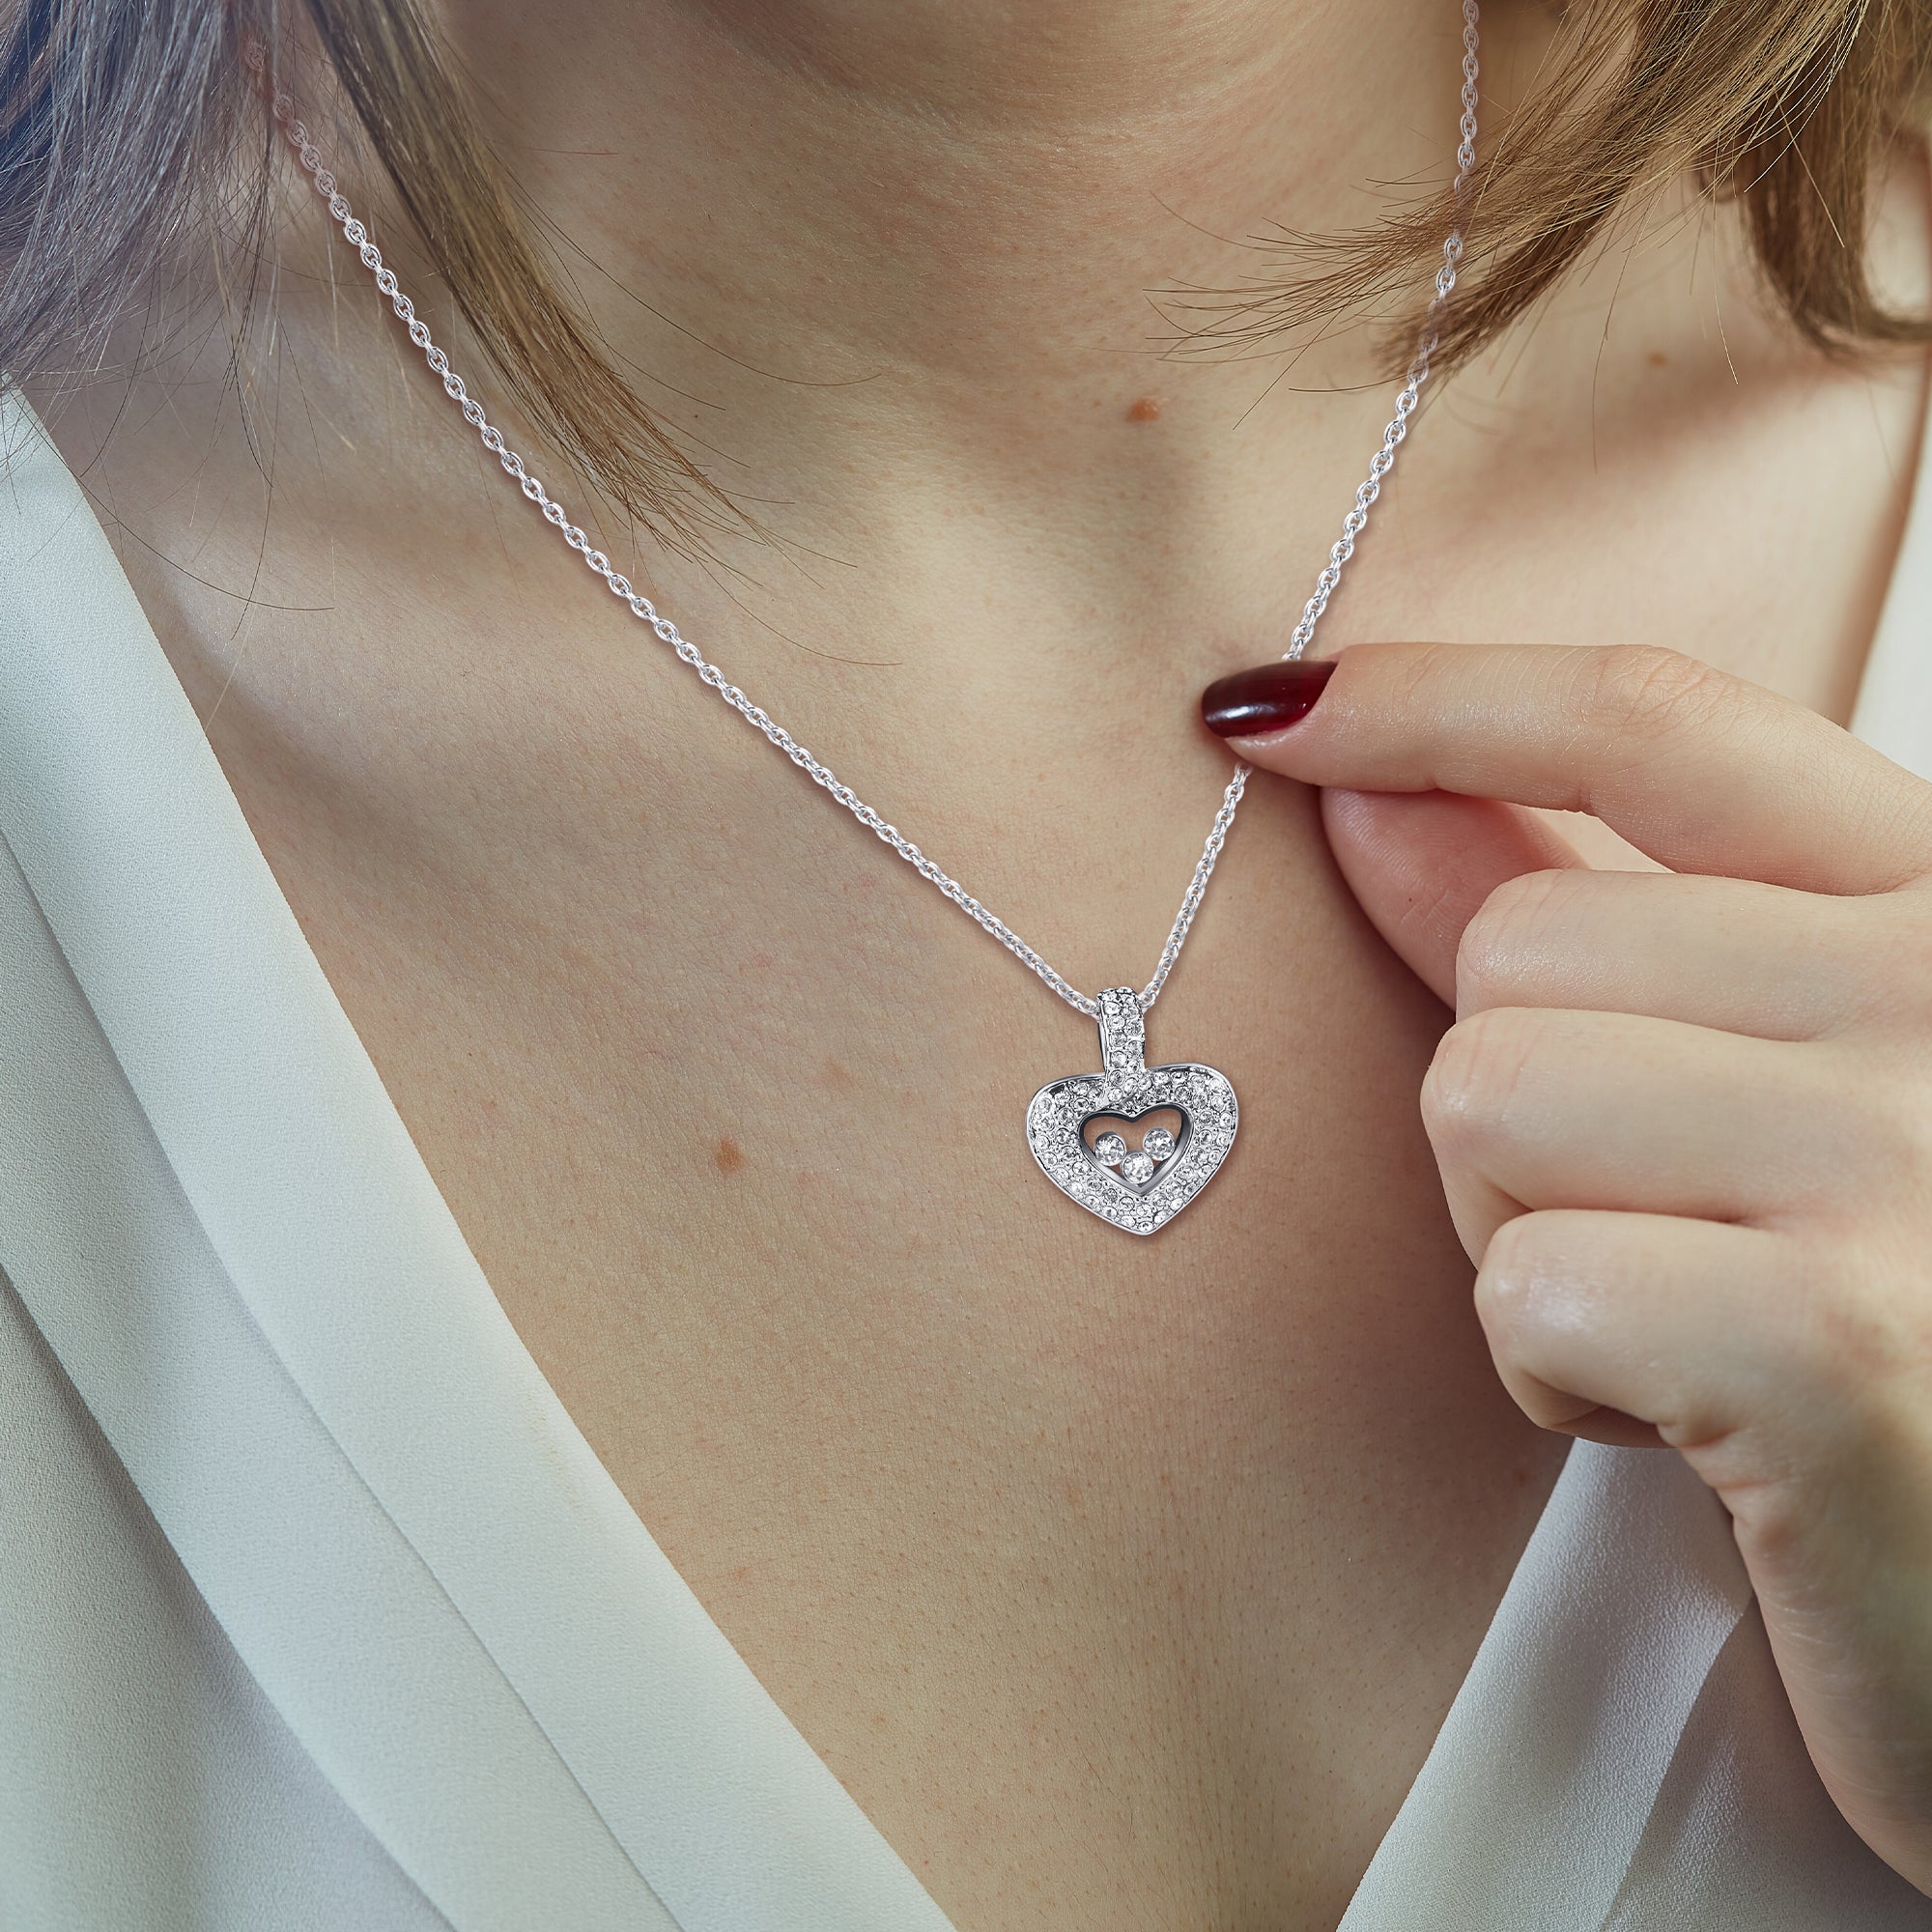 To My Daughter-in-Law - You Are Blessing of His Life - Tryndi Floating Heart Necklace